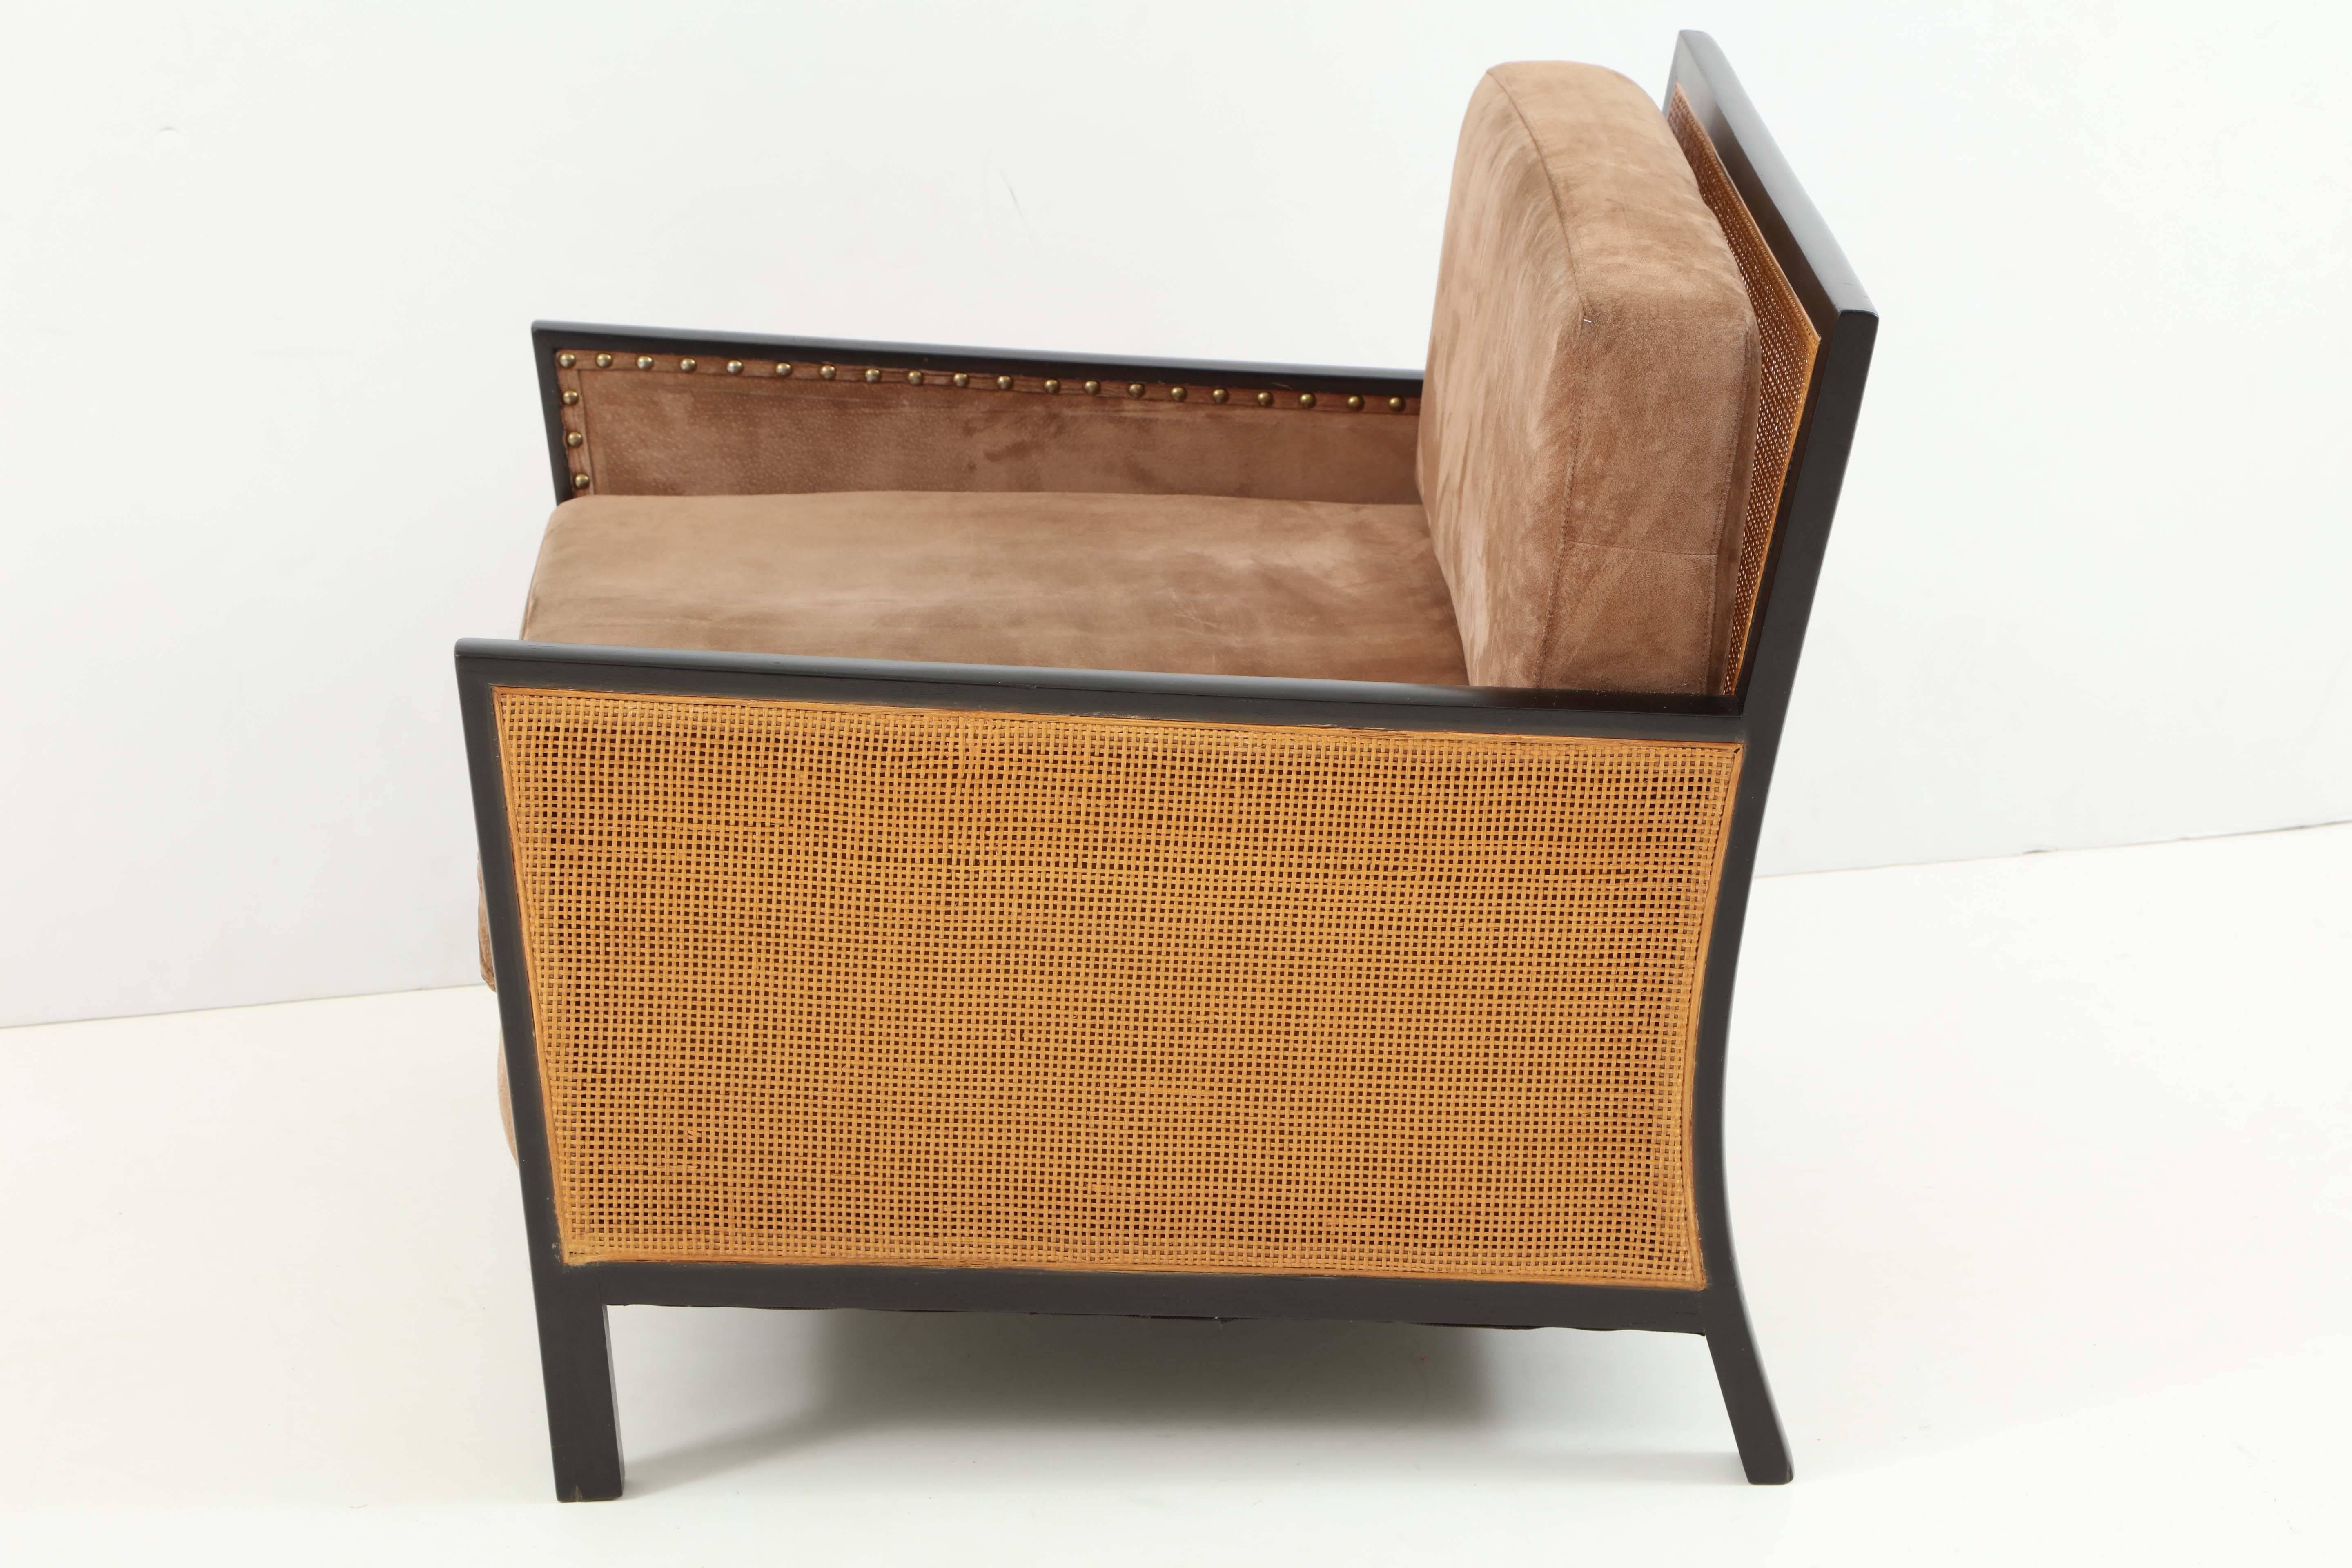 Pair of walnut lounge chairs, an early design by Milo Baughman for Arch Gordon, Chicago, 1955. Subtle play of angles and curves on the dark walnut frames, emphasized by the cane inserts on sides and back. Beautifully patinated split hide suede